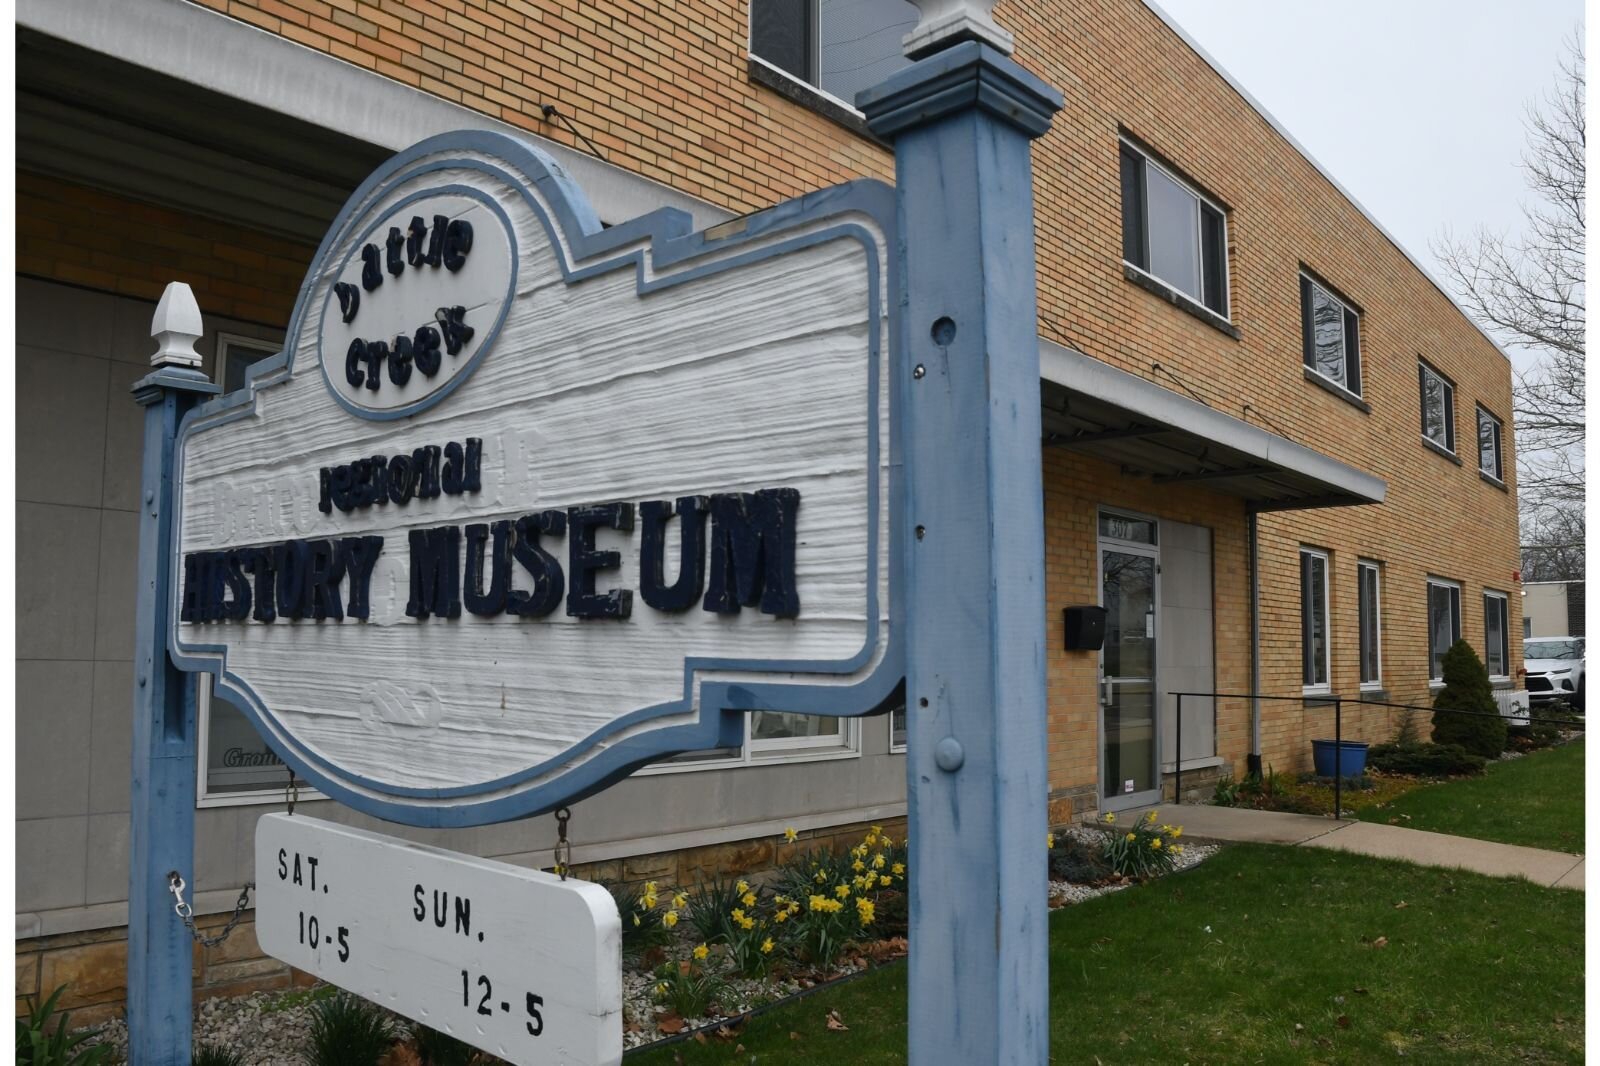 The Battle Creek Regional History Museum is located at 307 West Jackson Street.